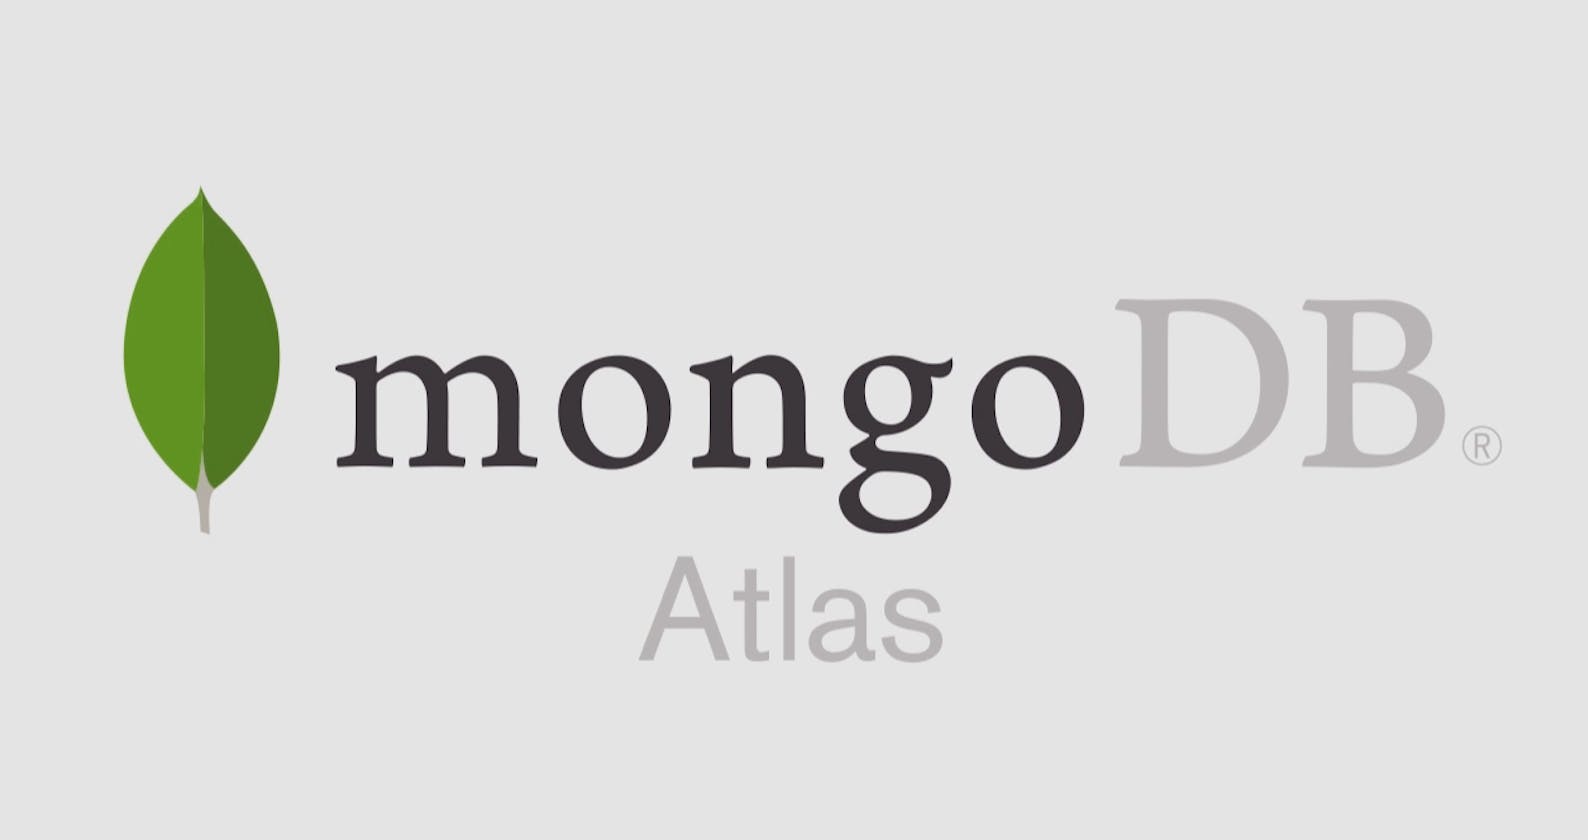 Introduction to Atlas: MongoDB's Powerful Cloud Database Service